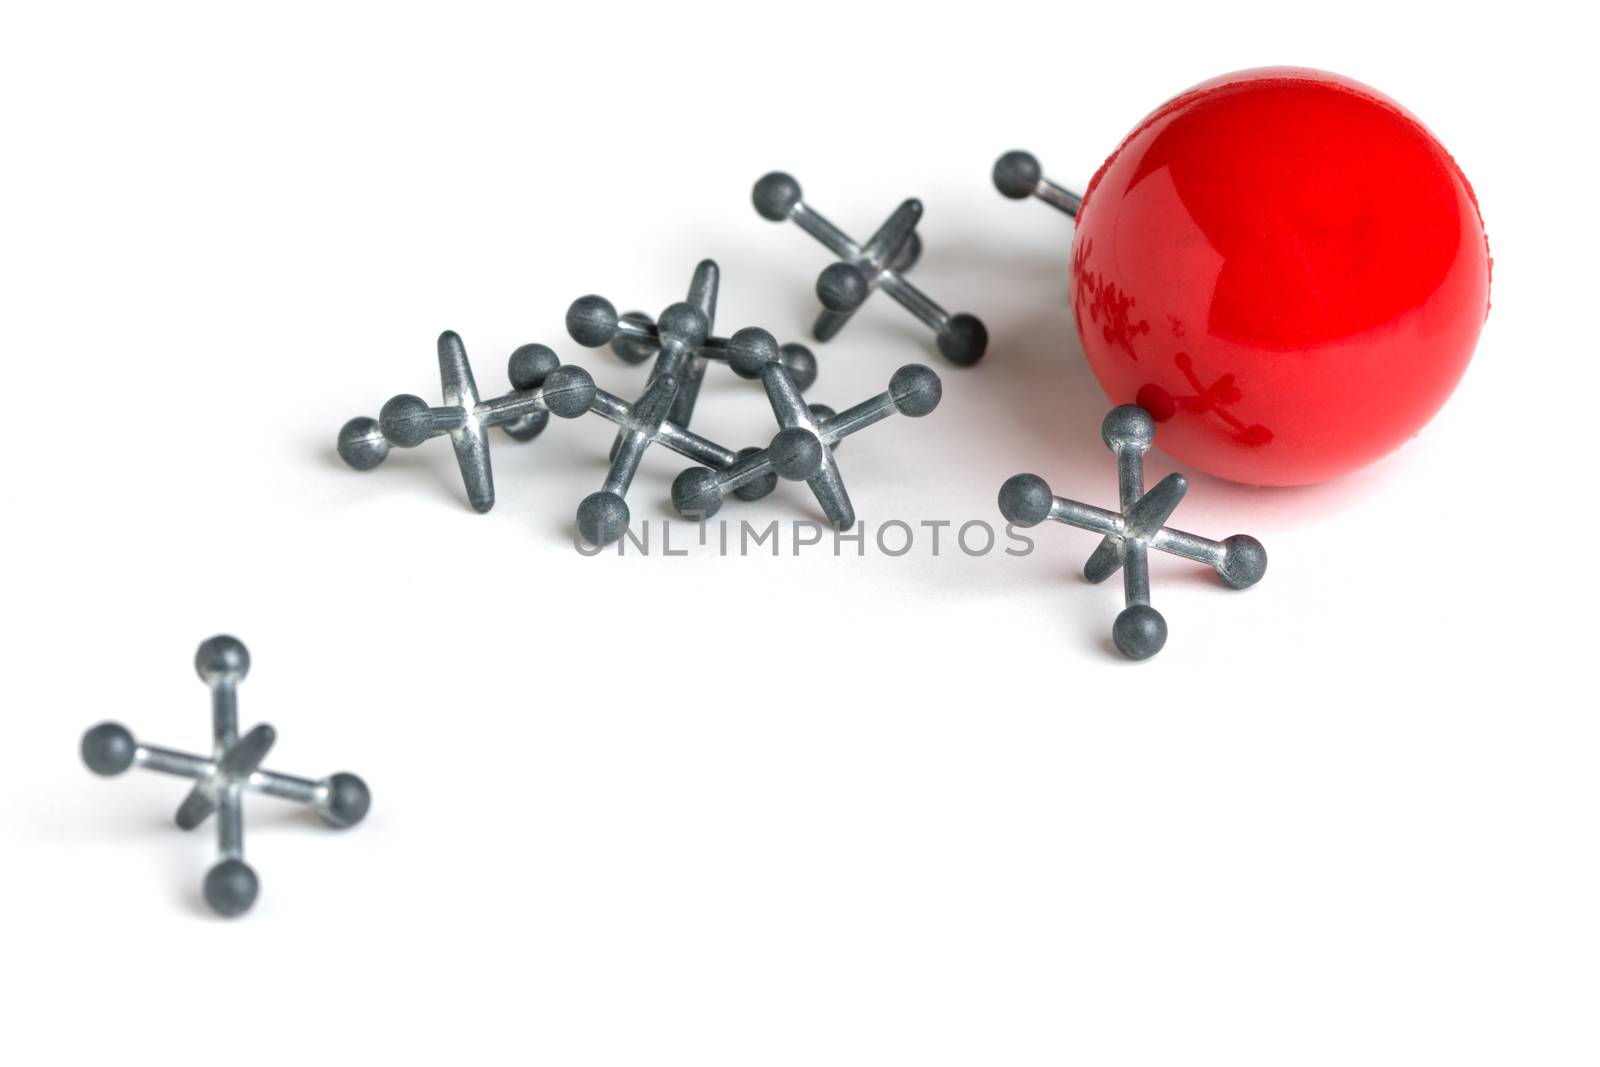 A set of metal jacks and a red rubber ball isolated on a white background.